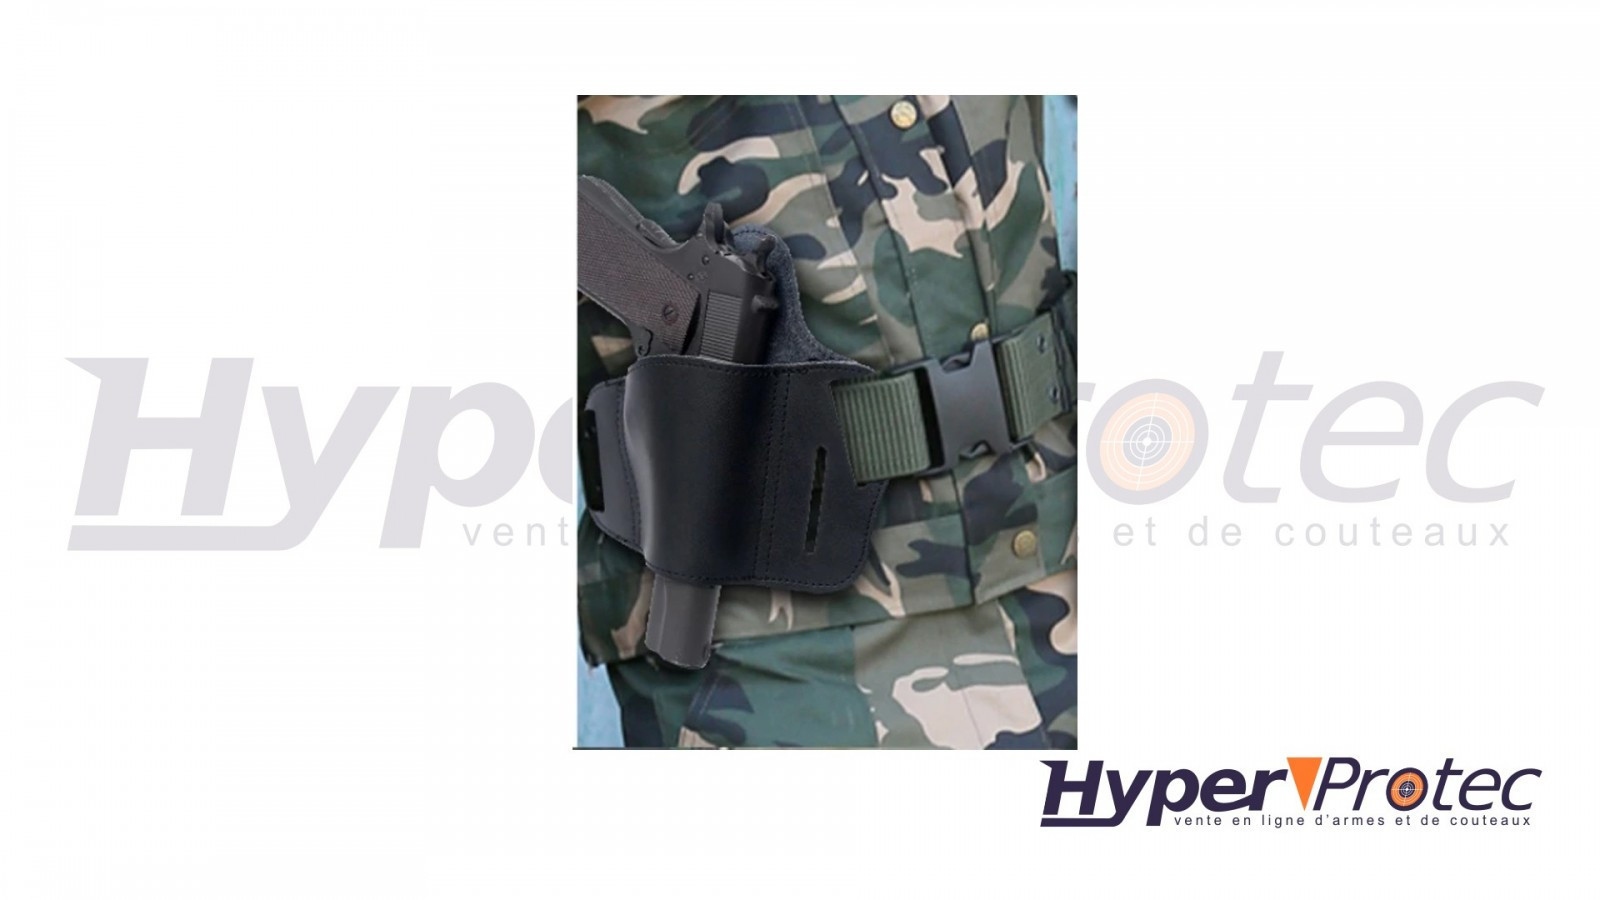 Holster port discret universel pistolet taille moyenne - Achat